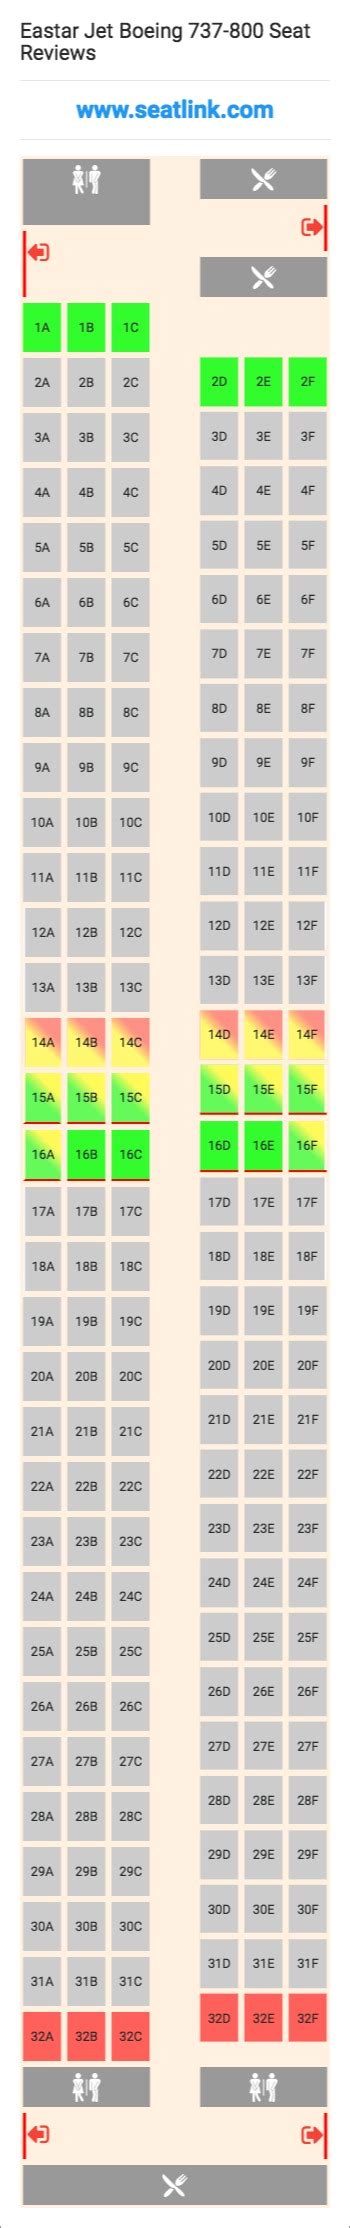 Jet Airways Boeing Winglets Seating Plan Awesome Home